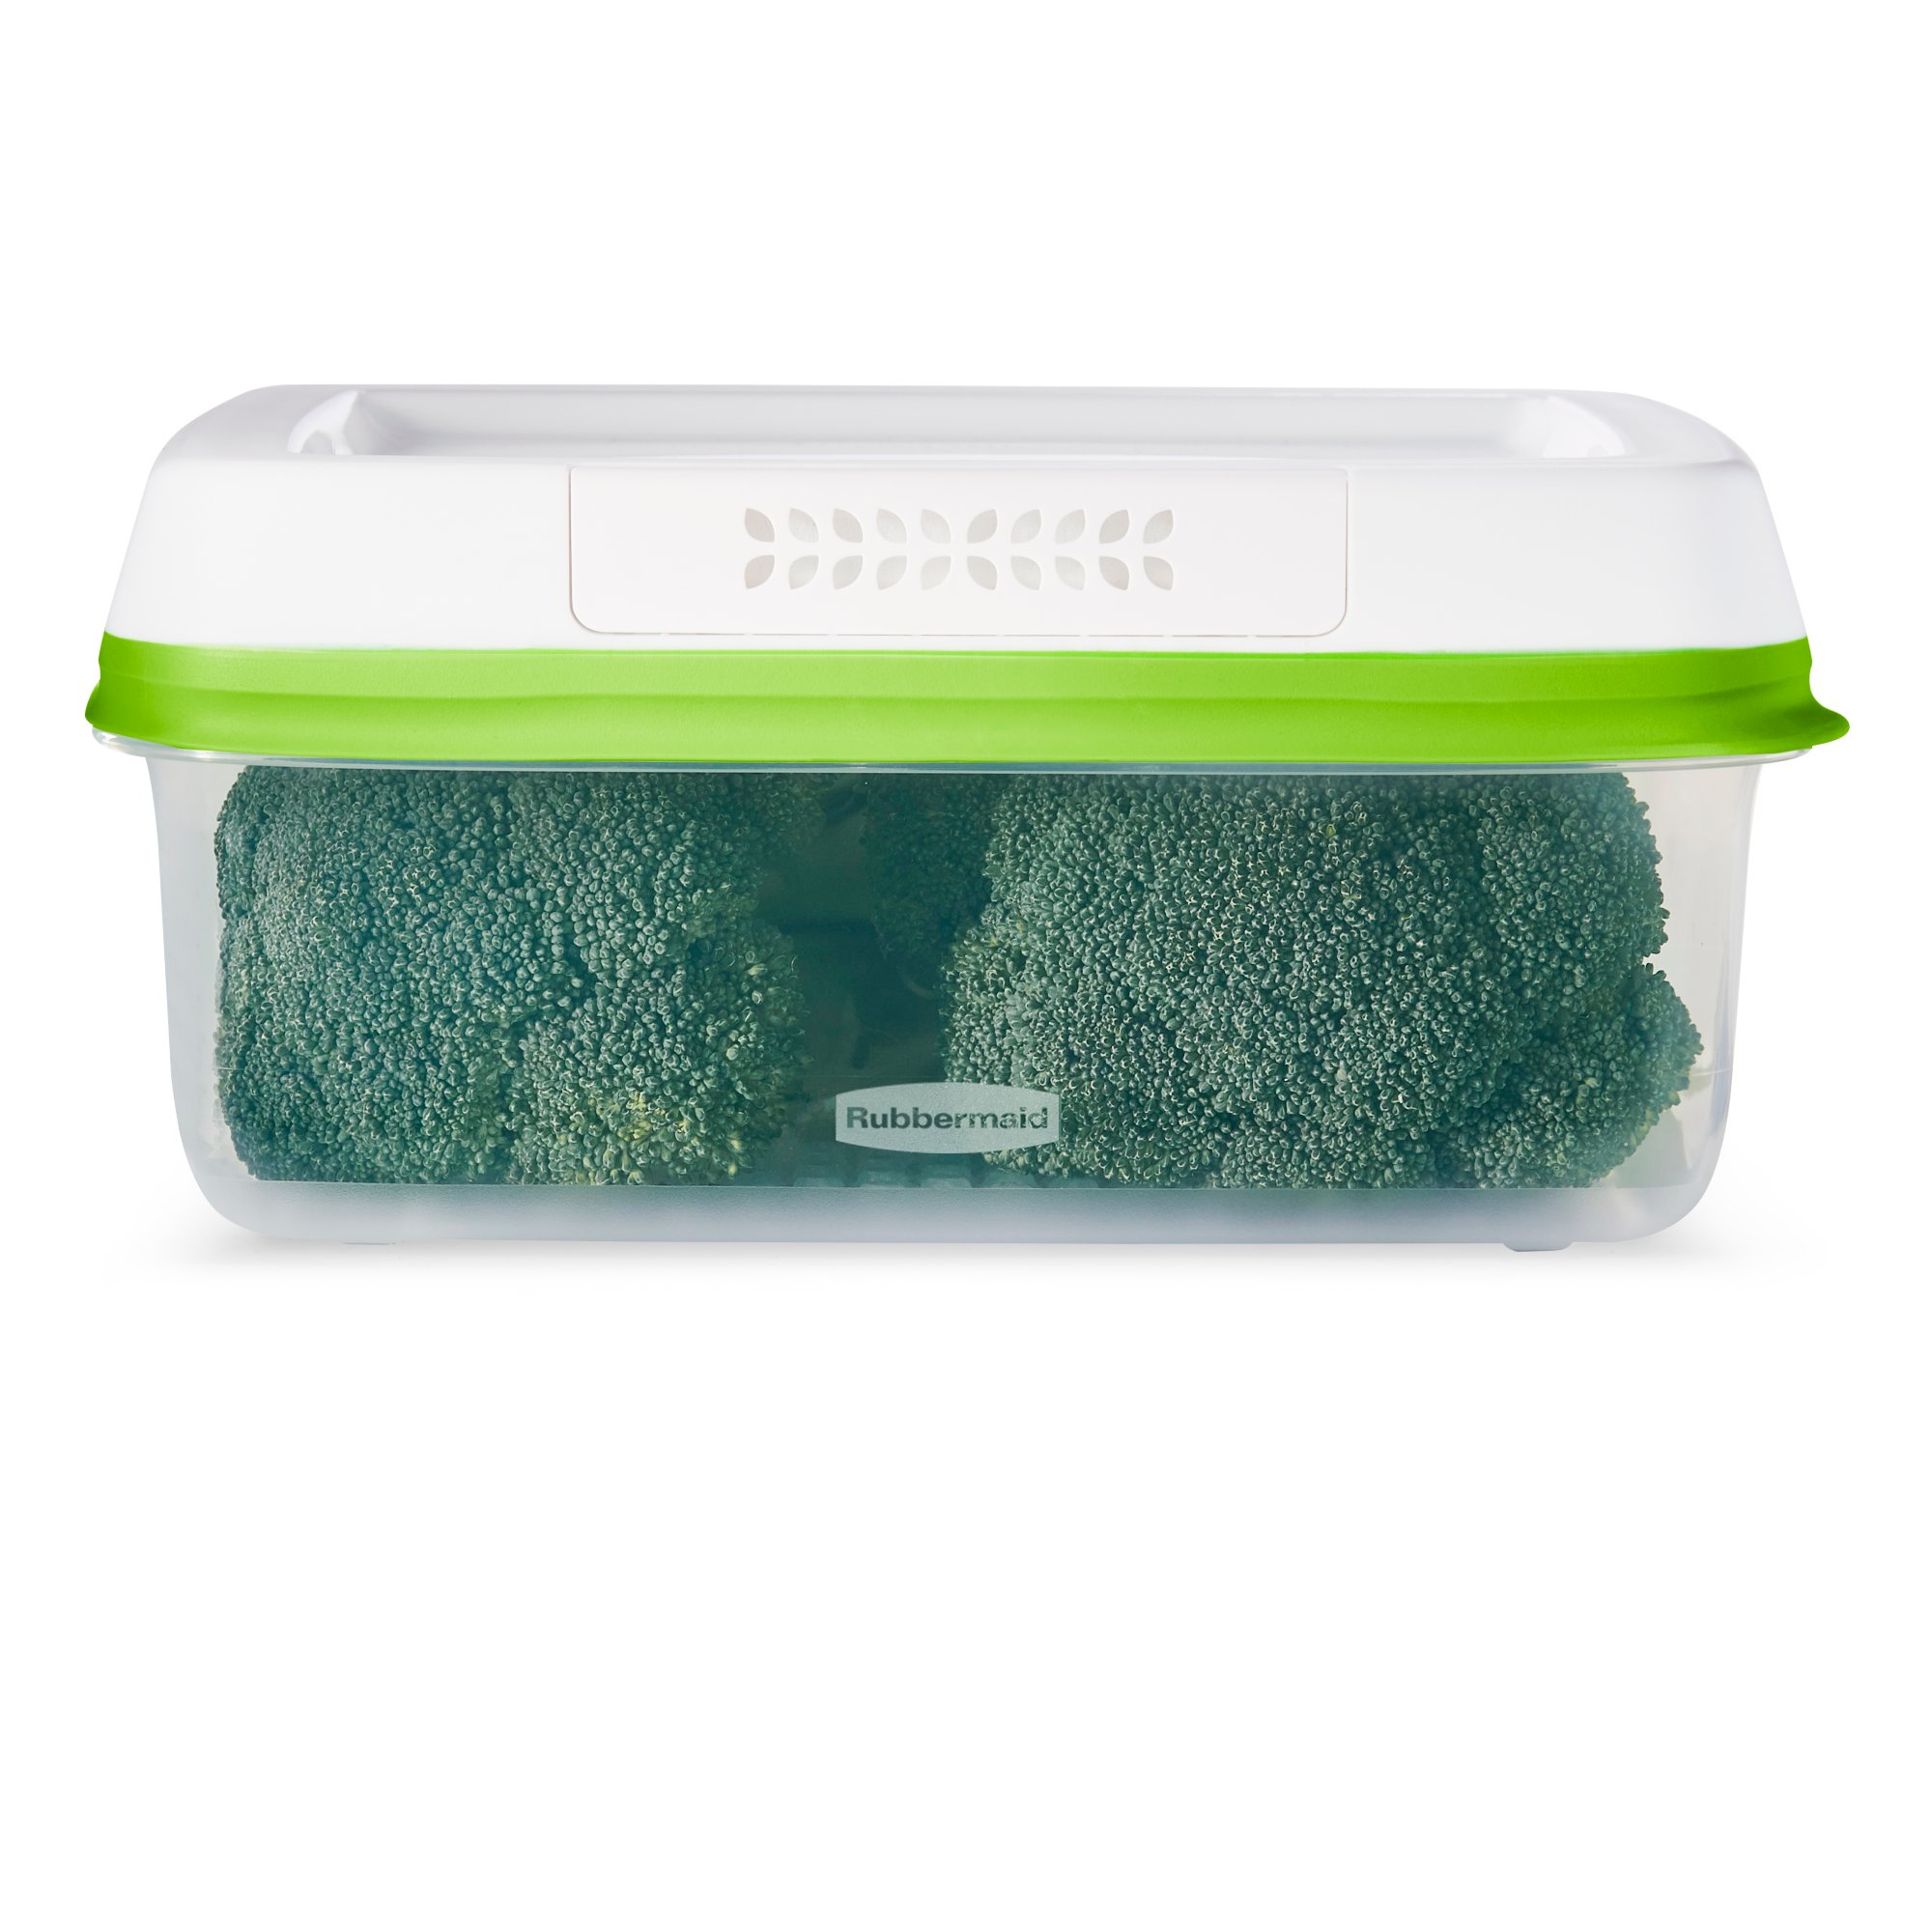 https://s7d9.scene7.com/is/image/NewellRubbermaid/2114816-rubbermaid-food-storage-green-11.3c-large-short-with-food-straight-on?wid=2000&hei=2000